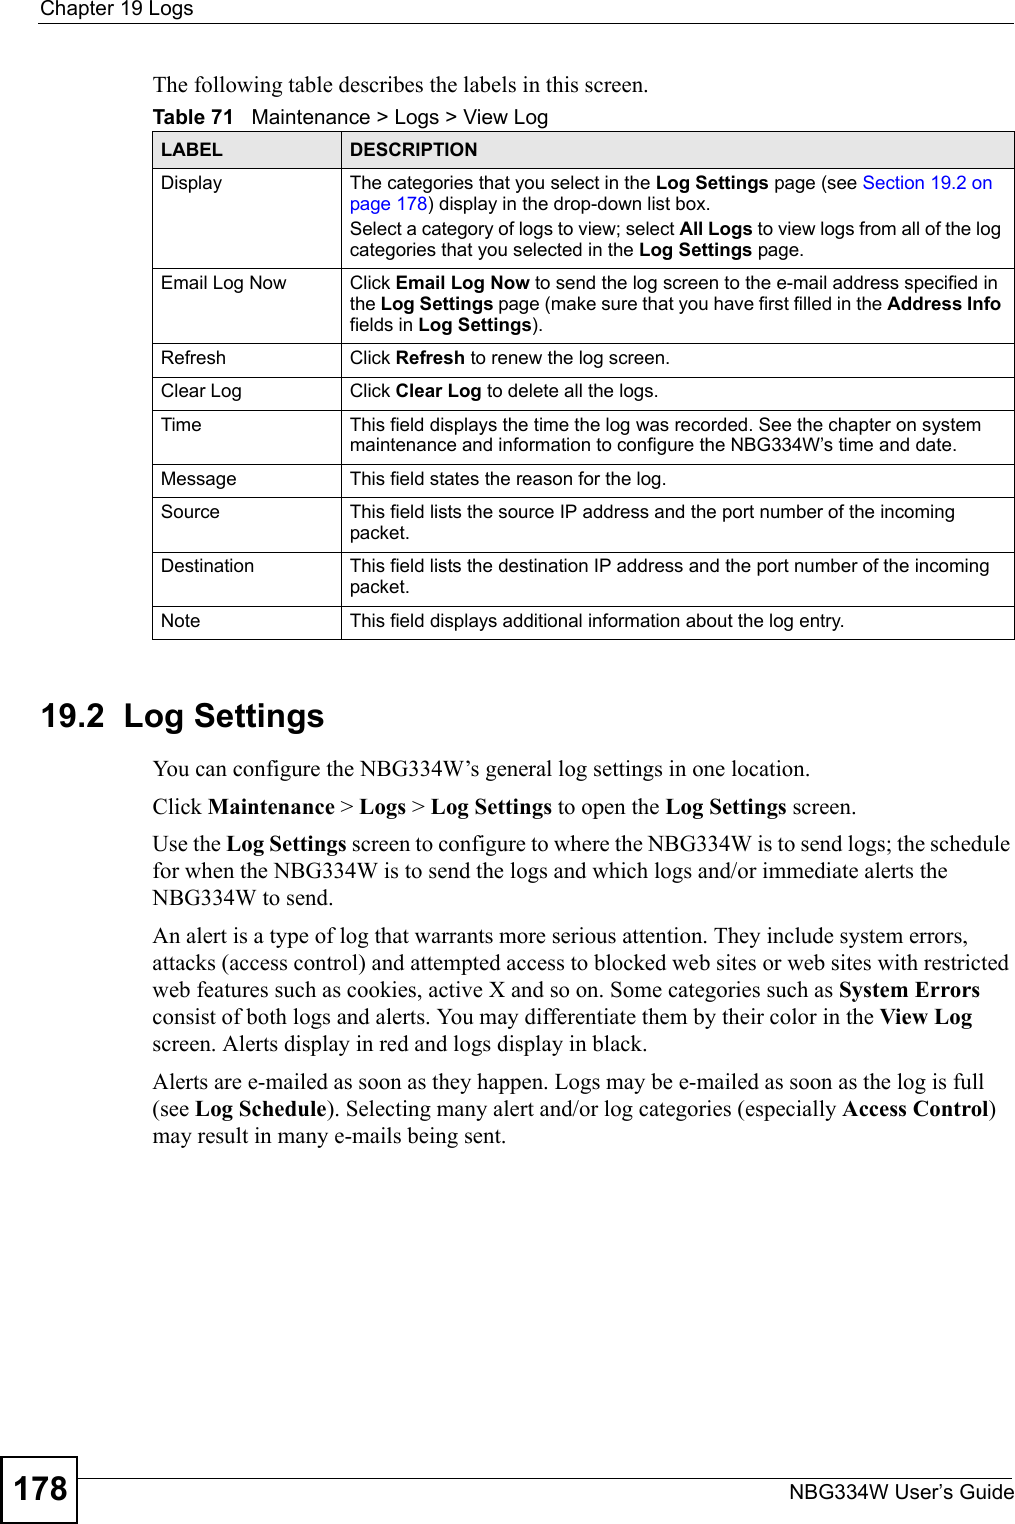 Chapter 19 LogsNBG334W User’s Guide178The following table describes the labels in this screen.19.2  Log SettingsYou can configure the NBG334W’s general log settings in one location.Click Maintenance &gt; Logs &gt; Log Settings to open the Log Settings screen.Use the Log Settings screen to configure to where the NBG334W is to send logs; the schedule for when the NBG334W is to send the logs and which logs and/or immediate alerts the NBG334W to send.An alert is a type of log that warrants more serious attention. They include system errors, attacks (access control) and attempted access to blocked web sites or web sites with restricted web features such as cookies, active X and so on. Some categories such as System Errors consist of both logs and alerts. You may differentiate them by their color in the View Log screen. Alerts display in red and logs display in black.Alerts are e-mailed as soon as they happen. Logs may be e-mailed as soon as the log is full (see Log Schedule). Selecting many alert and/or log categories (especially Access Control) may result in many e-mails being sent.Table 71   Maintenance &gt; Logs &gt; View LogLABEL DESCRIPTIONDisplay  The categories that you select in the Log Settings page (see Section 19.2 on page 178) display in the drop-down list box.Select a category of logs to view; select All Logs to view logs from all of the log categories that you selected in the Log Settings page. Email Log Now  Click Email Log Now to send the log screen to the e-mail address specified in the Log Settings page (make sure that you have first filled in the Address Info fields in Log Settings).Refresh Click Refresh to renew the log screen. Clear Log  Click Clear Log to delete all the logs. Time  This field displays the time the log was recorded. See the chapter on system maintenance and information to configure the NBG334W’s time and date.Message This field states the reason for the log.Source This field lists the source IP address and the port number of the incoming packet.Destination  This field lists the destination IP address and the port number of the incoming packet.Note This field displays additional information about the log entry. 